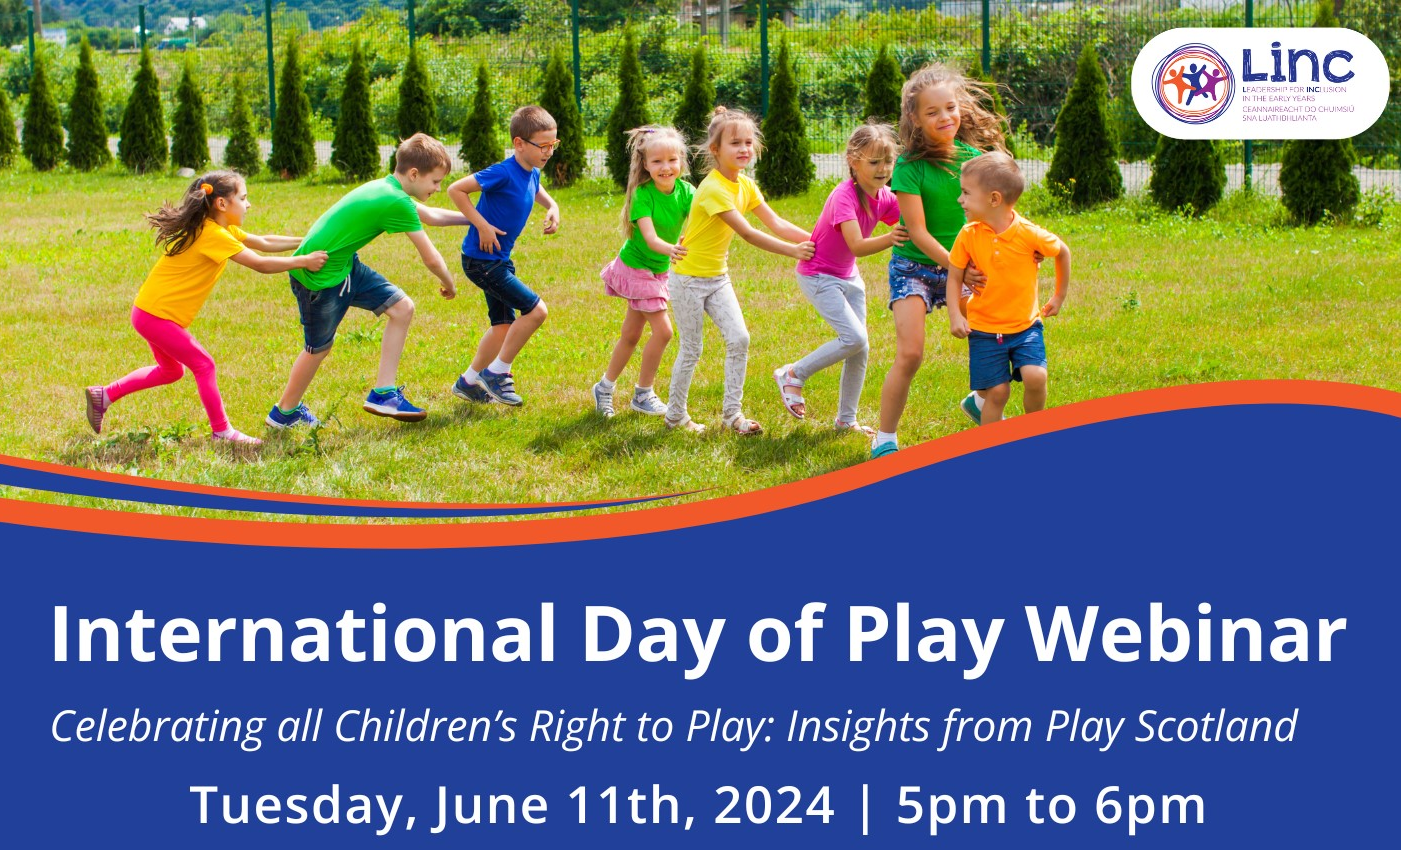 Celebrating all Children’s Right to Play